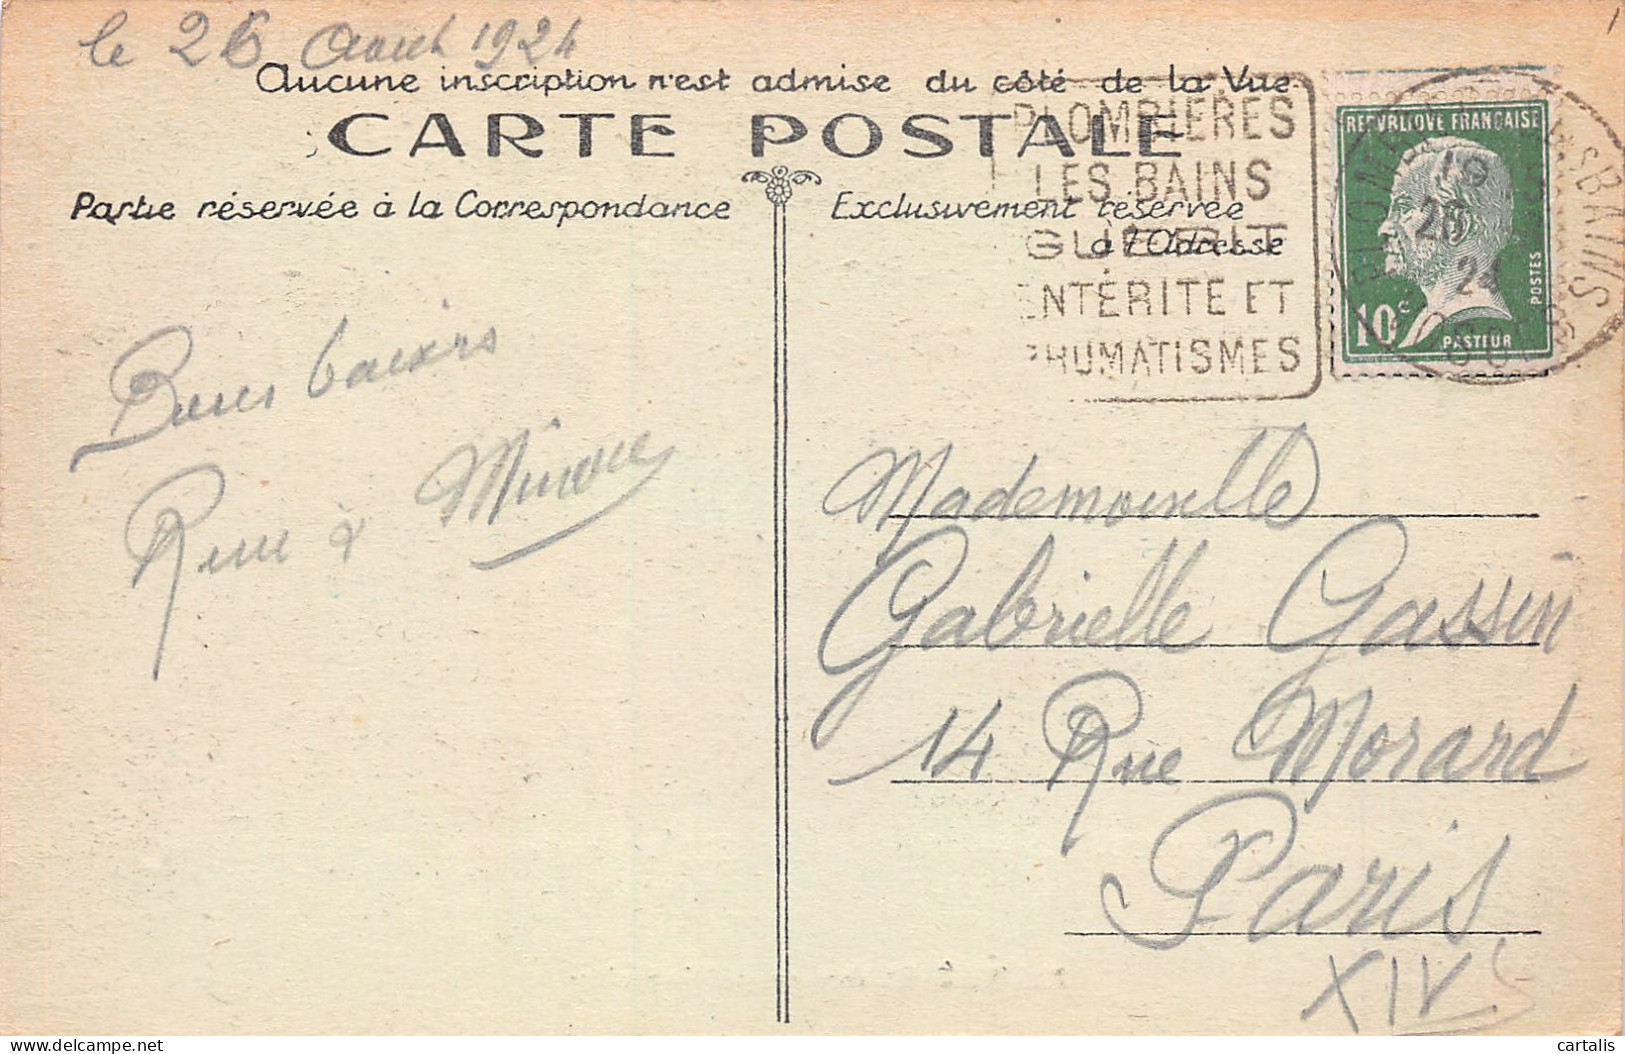 88-PLOMBIERES-N°3812-E/0177 - Plombieres Les Bains